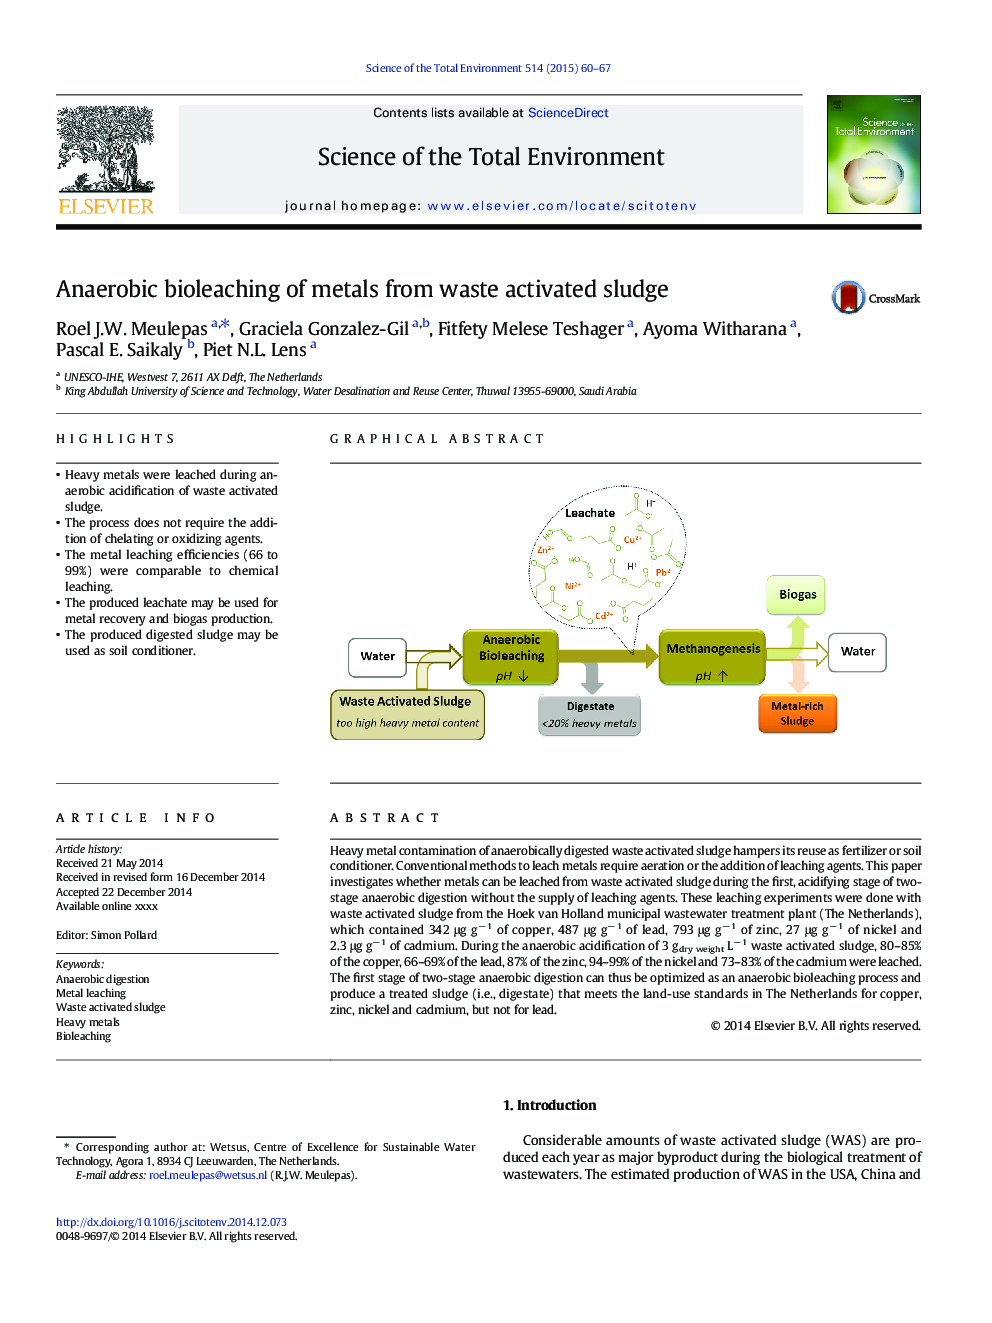 Anaerobic bioleaching of metals from waste activated sludge